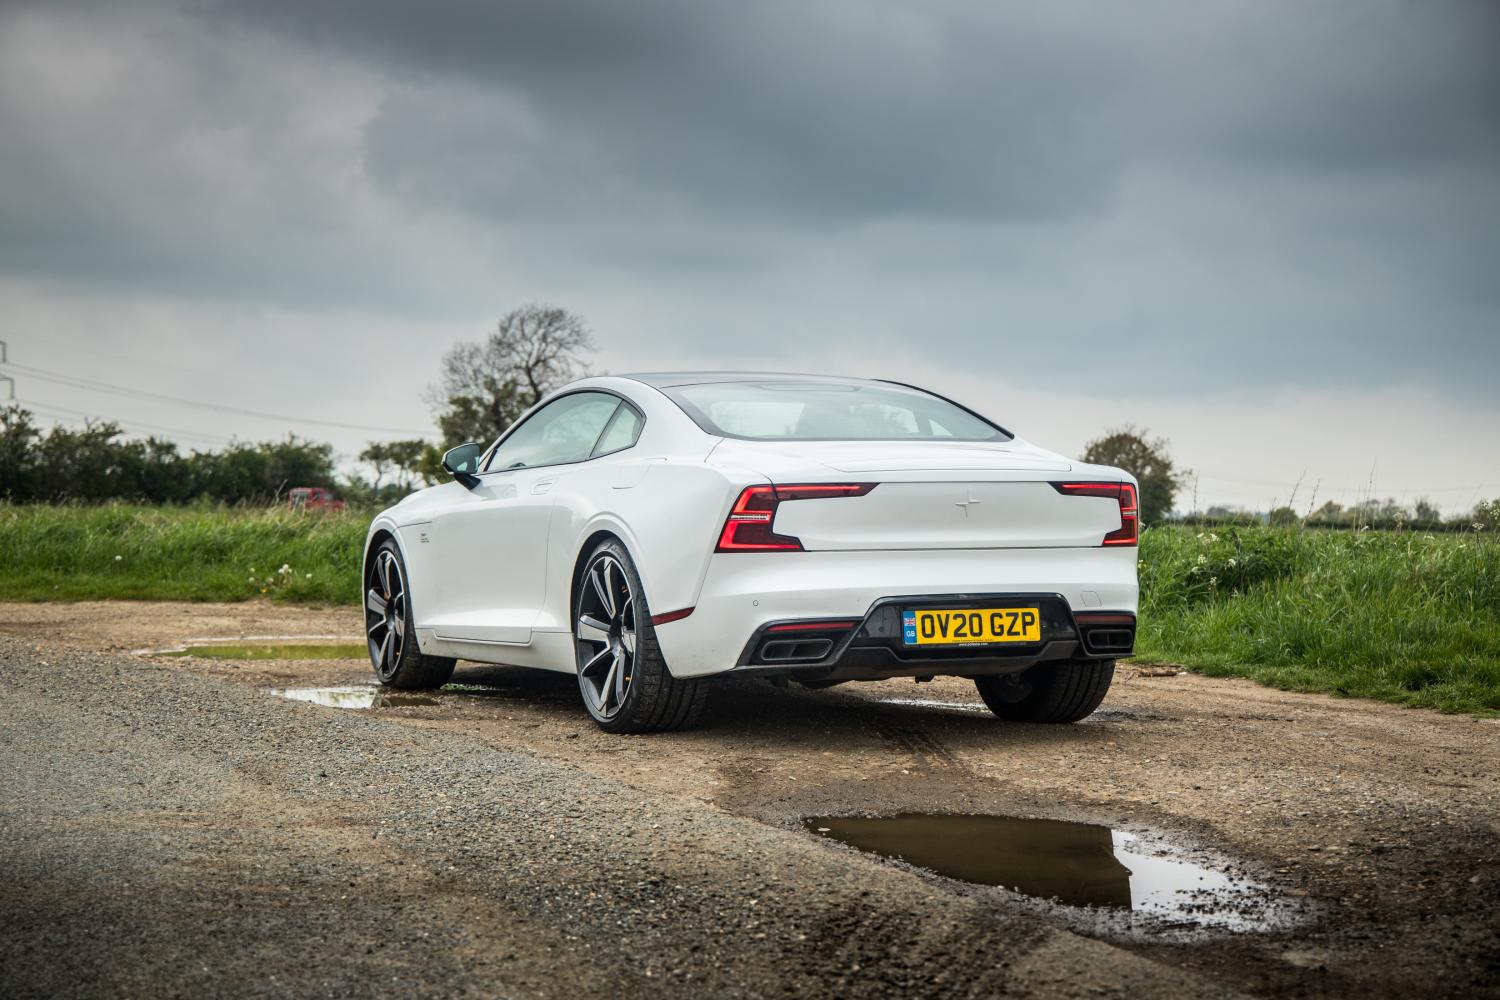 The Polestar 1 Is Probably The Strangest Car On Sale, But That's Why I Love It